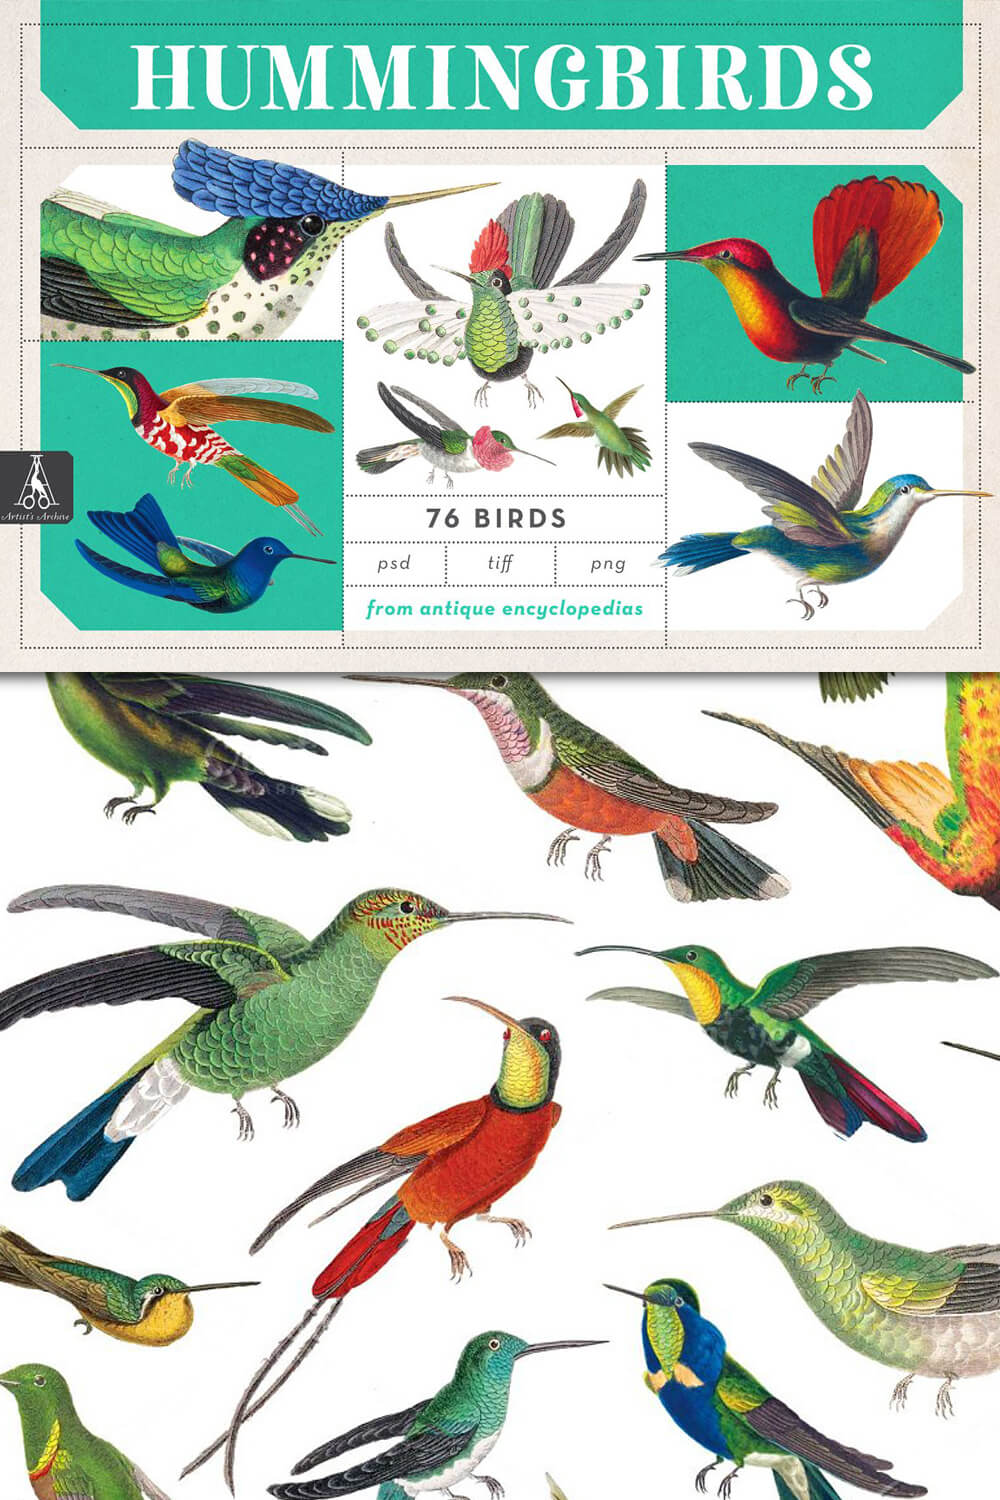 Many different drawings of hummingbirds on a white background.